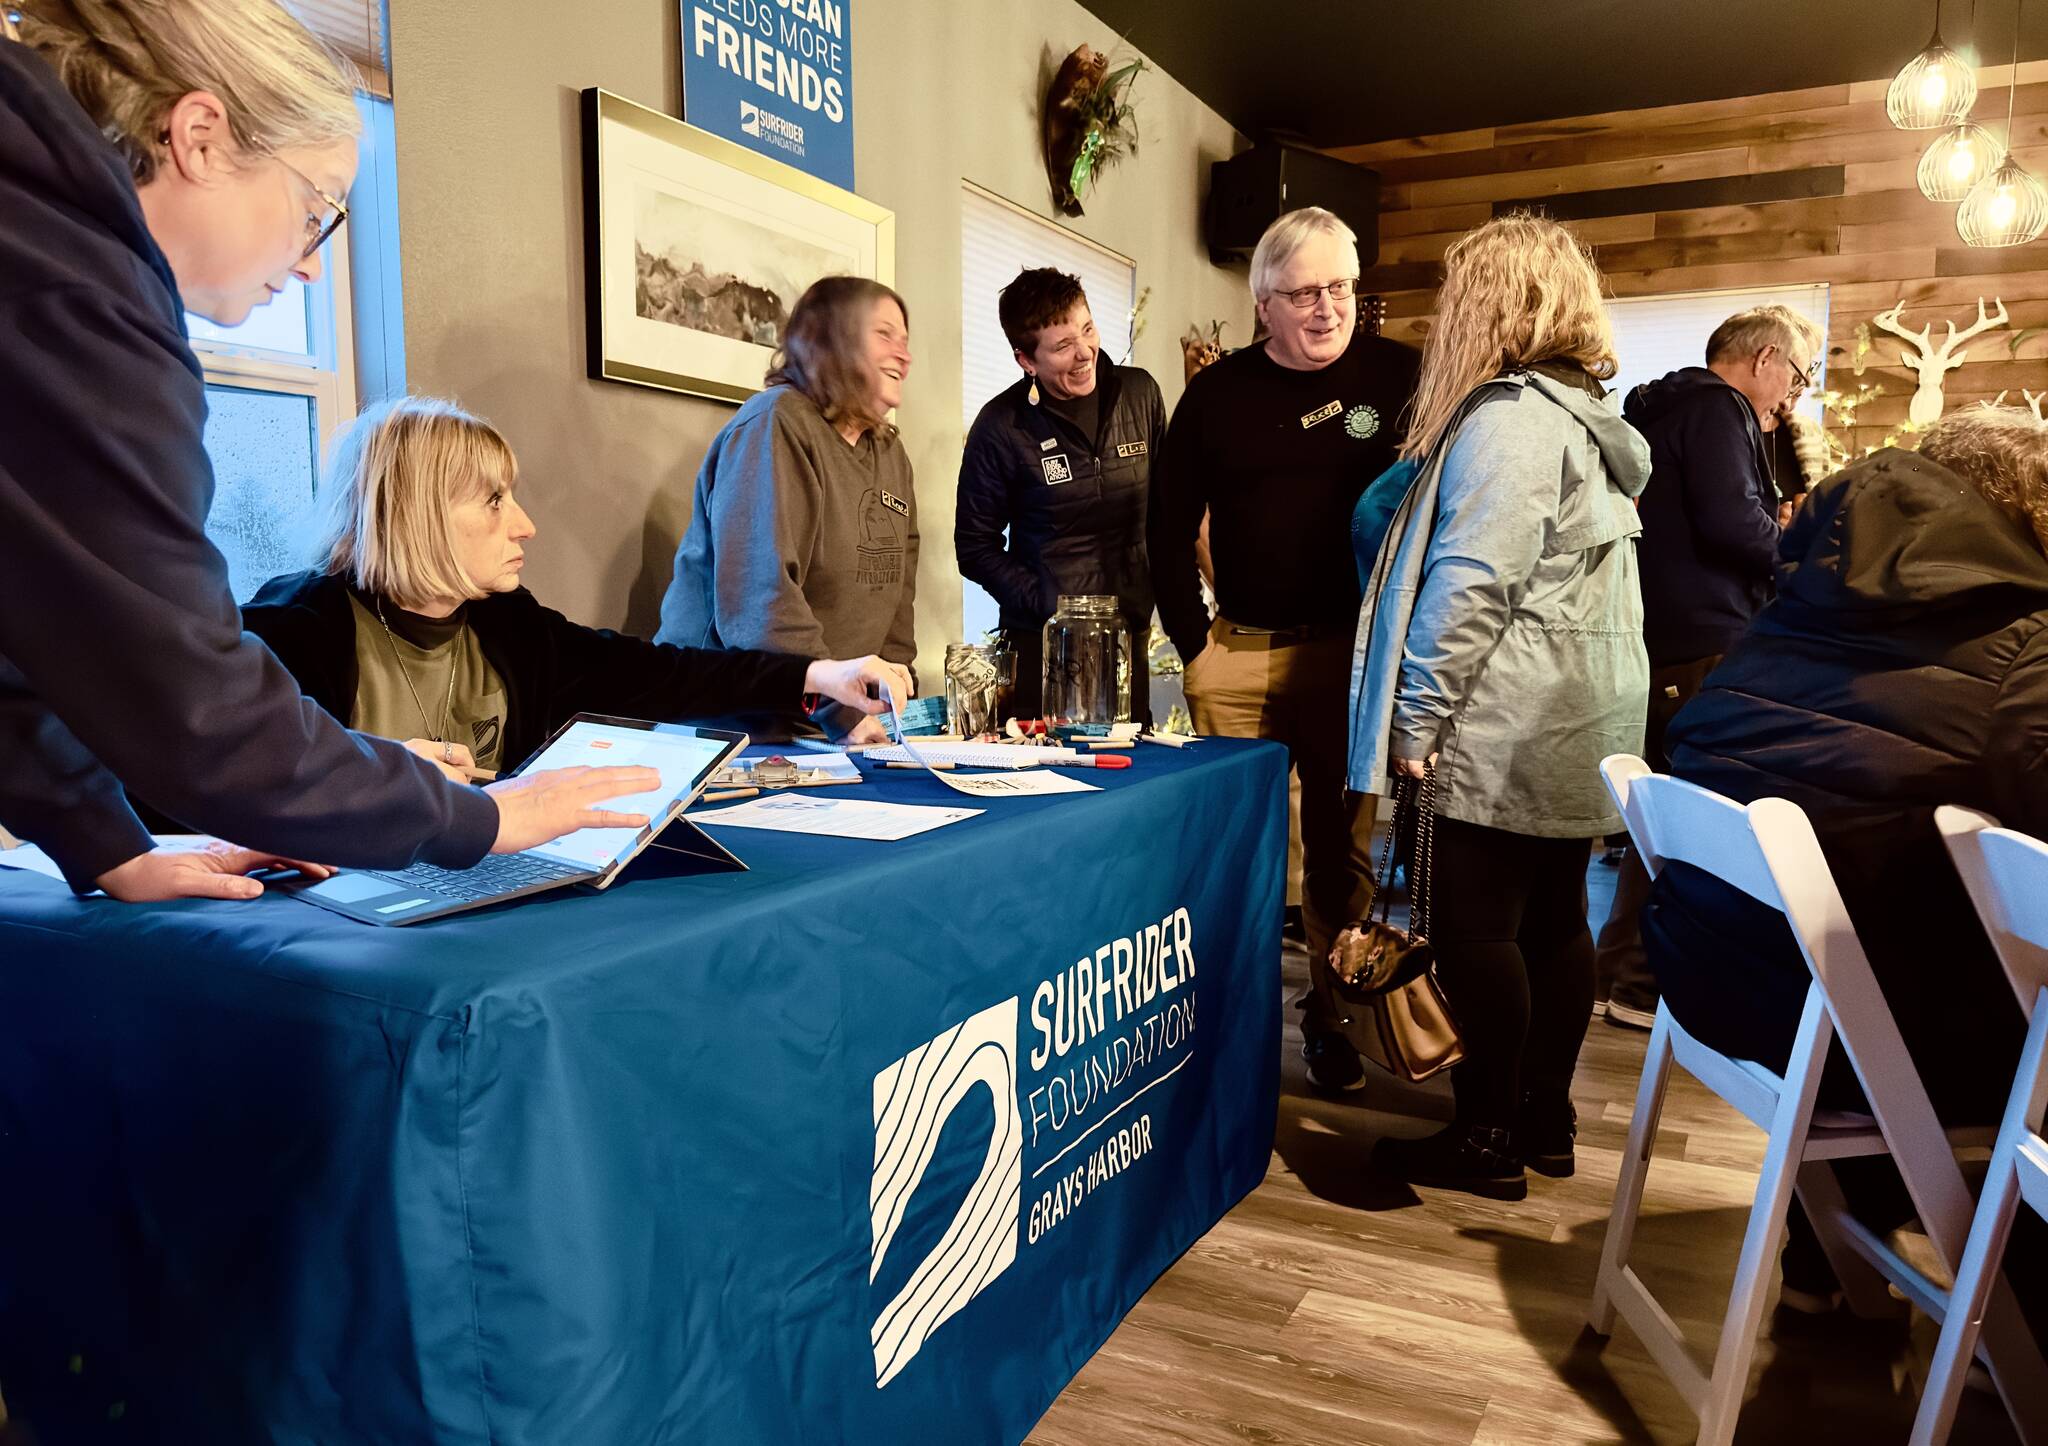 Kimberly Johnson / Surfrider Grays Harbor
Local chapter chair Bruce Rittenhouse and state coordinator Liz Schotman, center, converse with an attendee at a launch party for the Surfrider Foundation’s new Grays Harbor chapter at the Oyhut Bay Grill in Ocean Shores on Feb. 27.